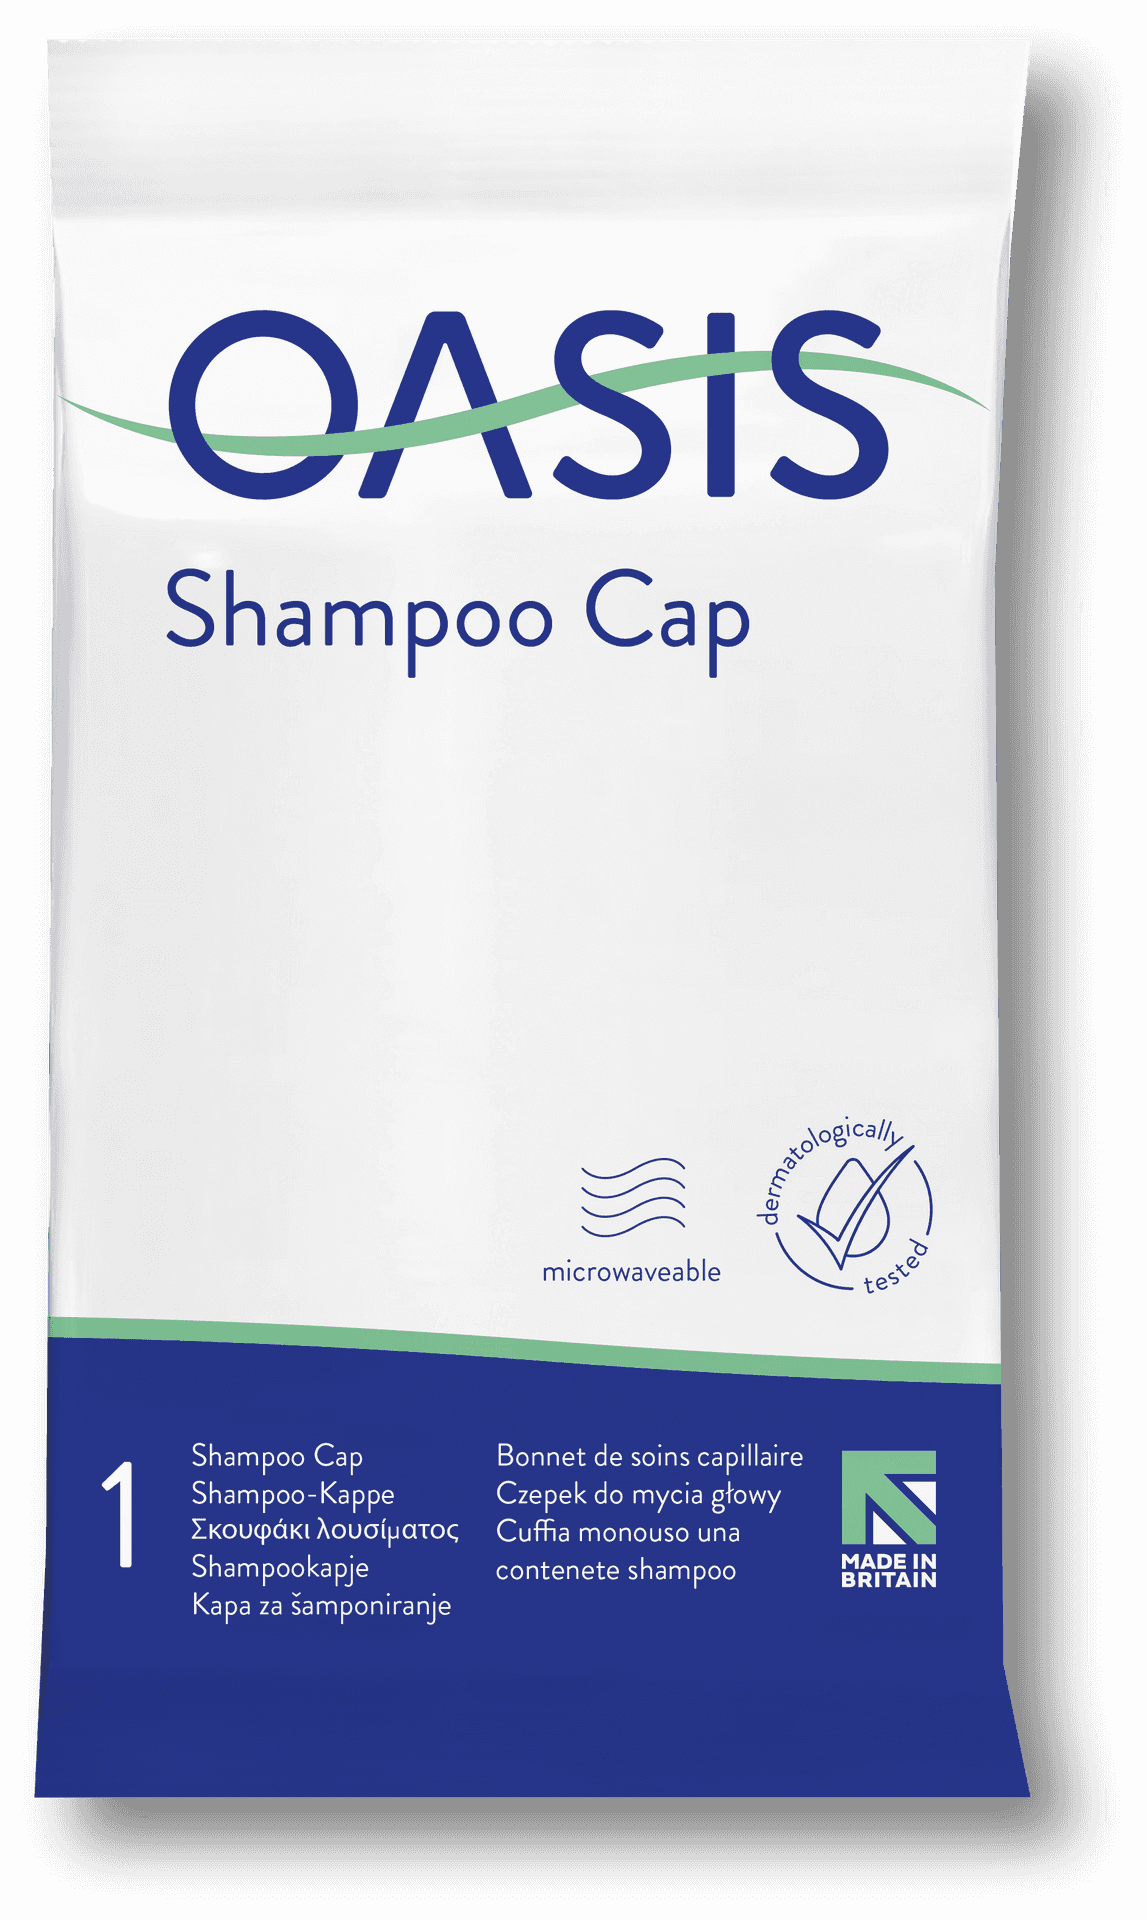 Oasis Shampoo Cap Product Packaging PNG image